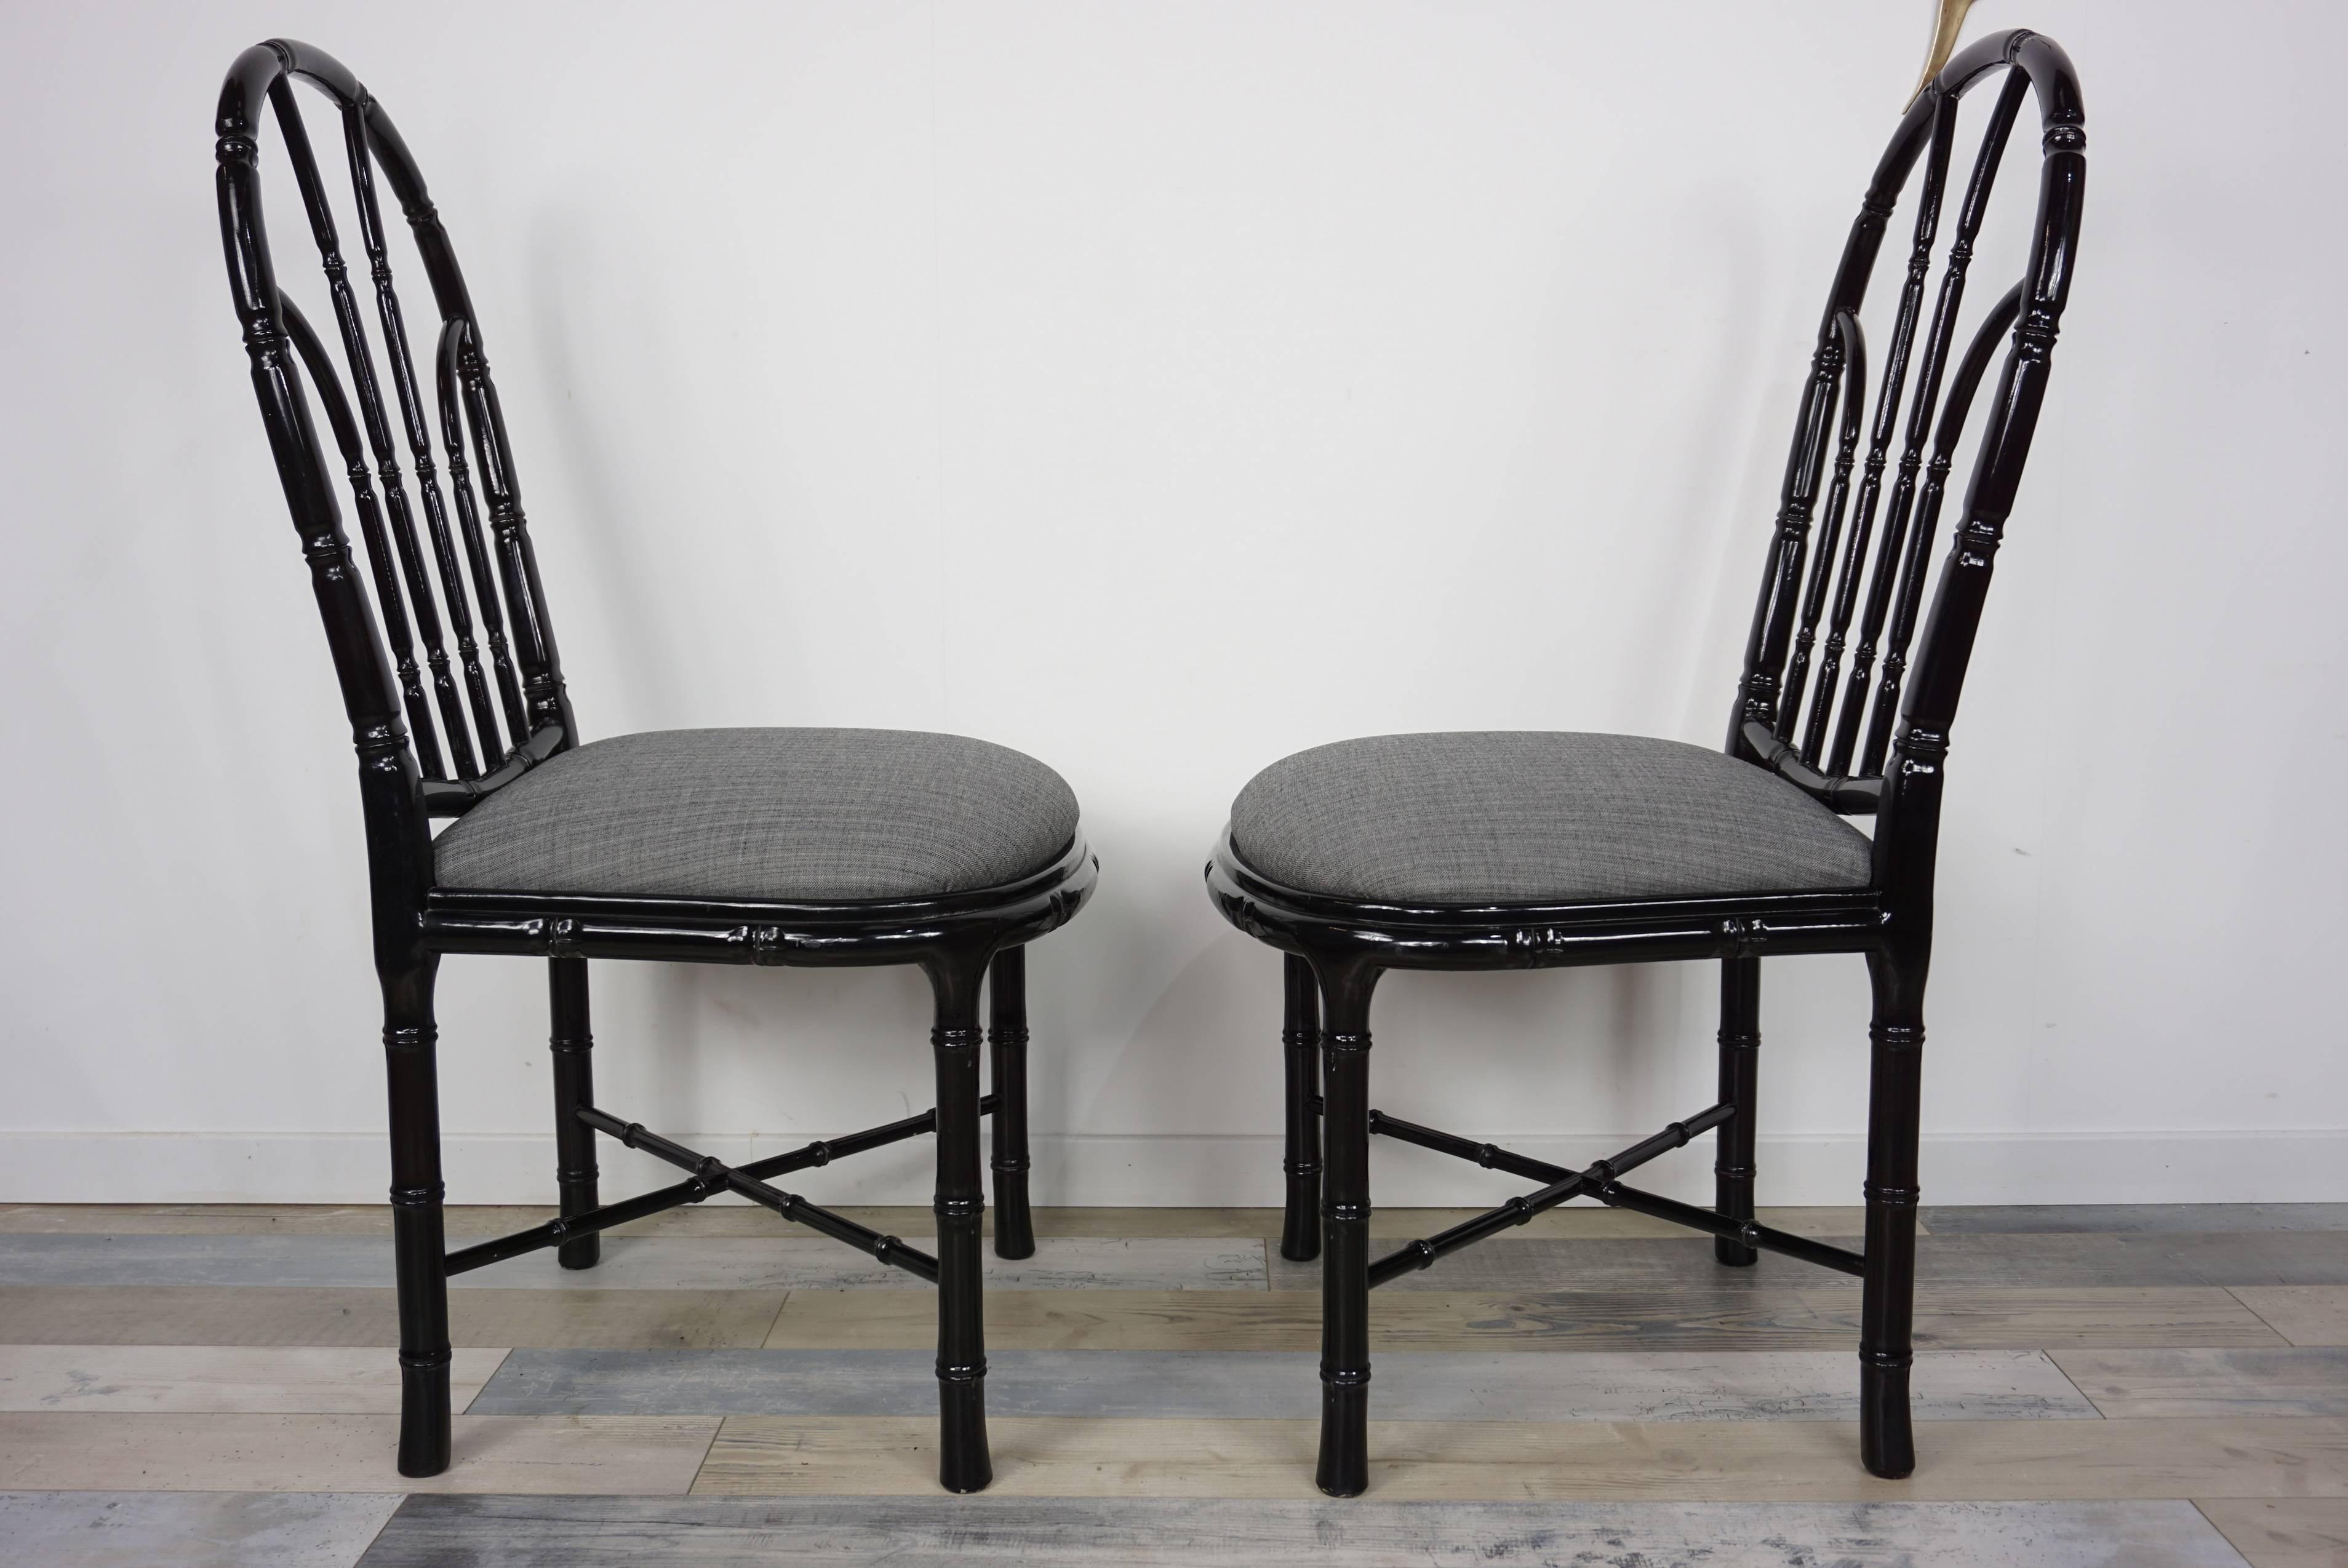 Black Lacquered Wood Set of Four Chairs Optical Illusion 8